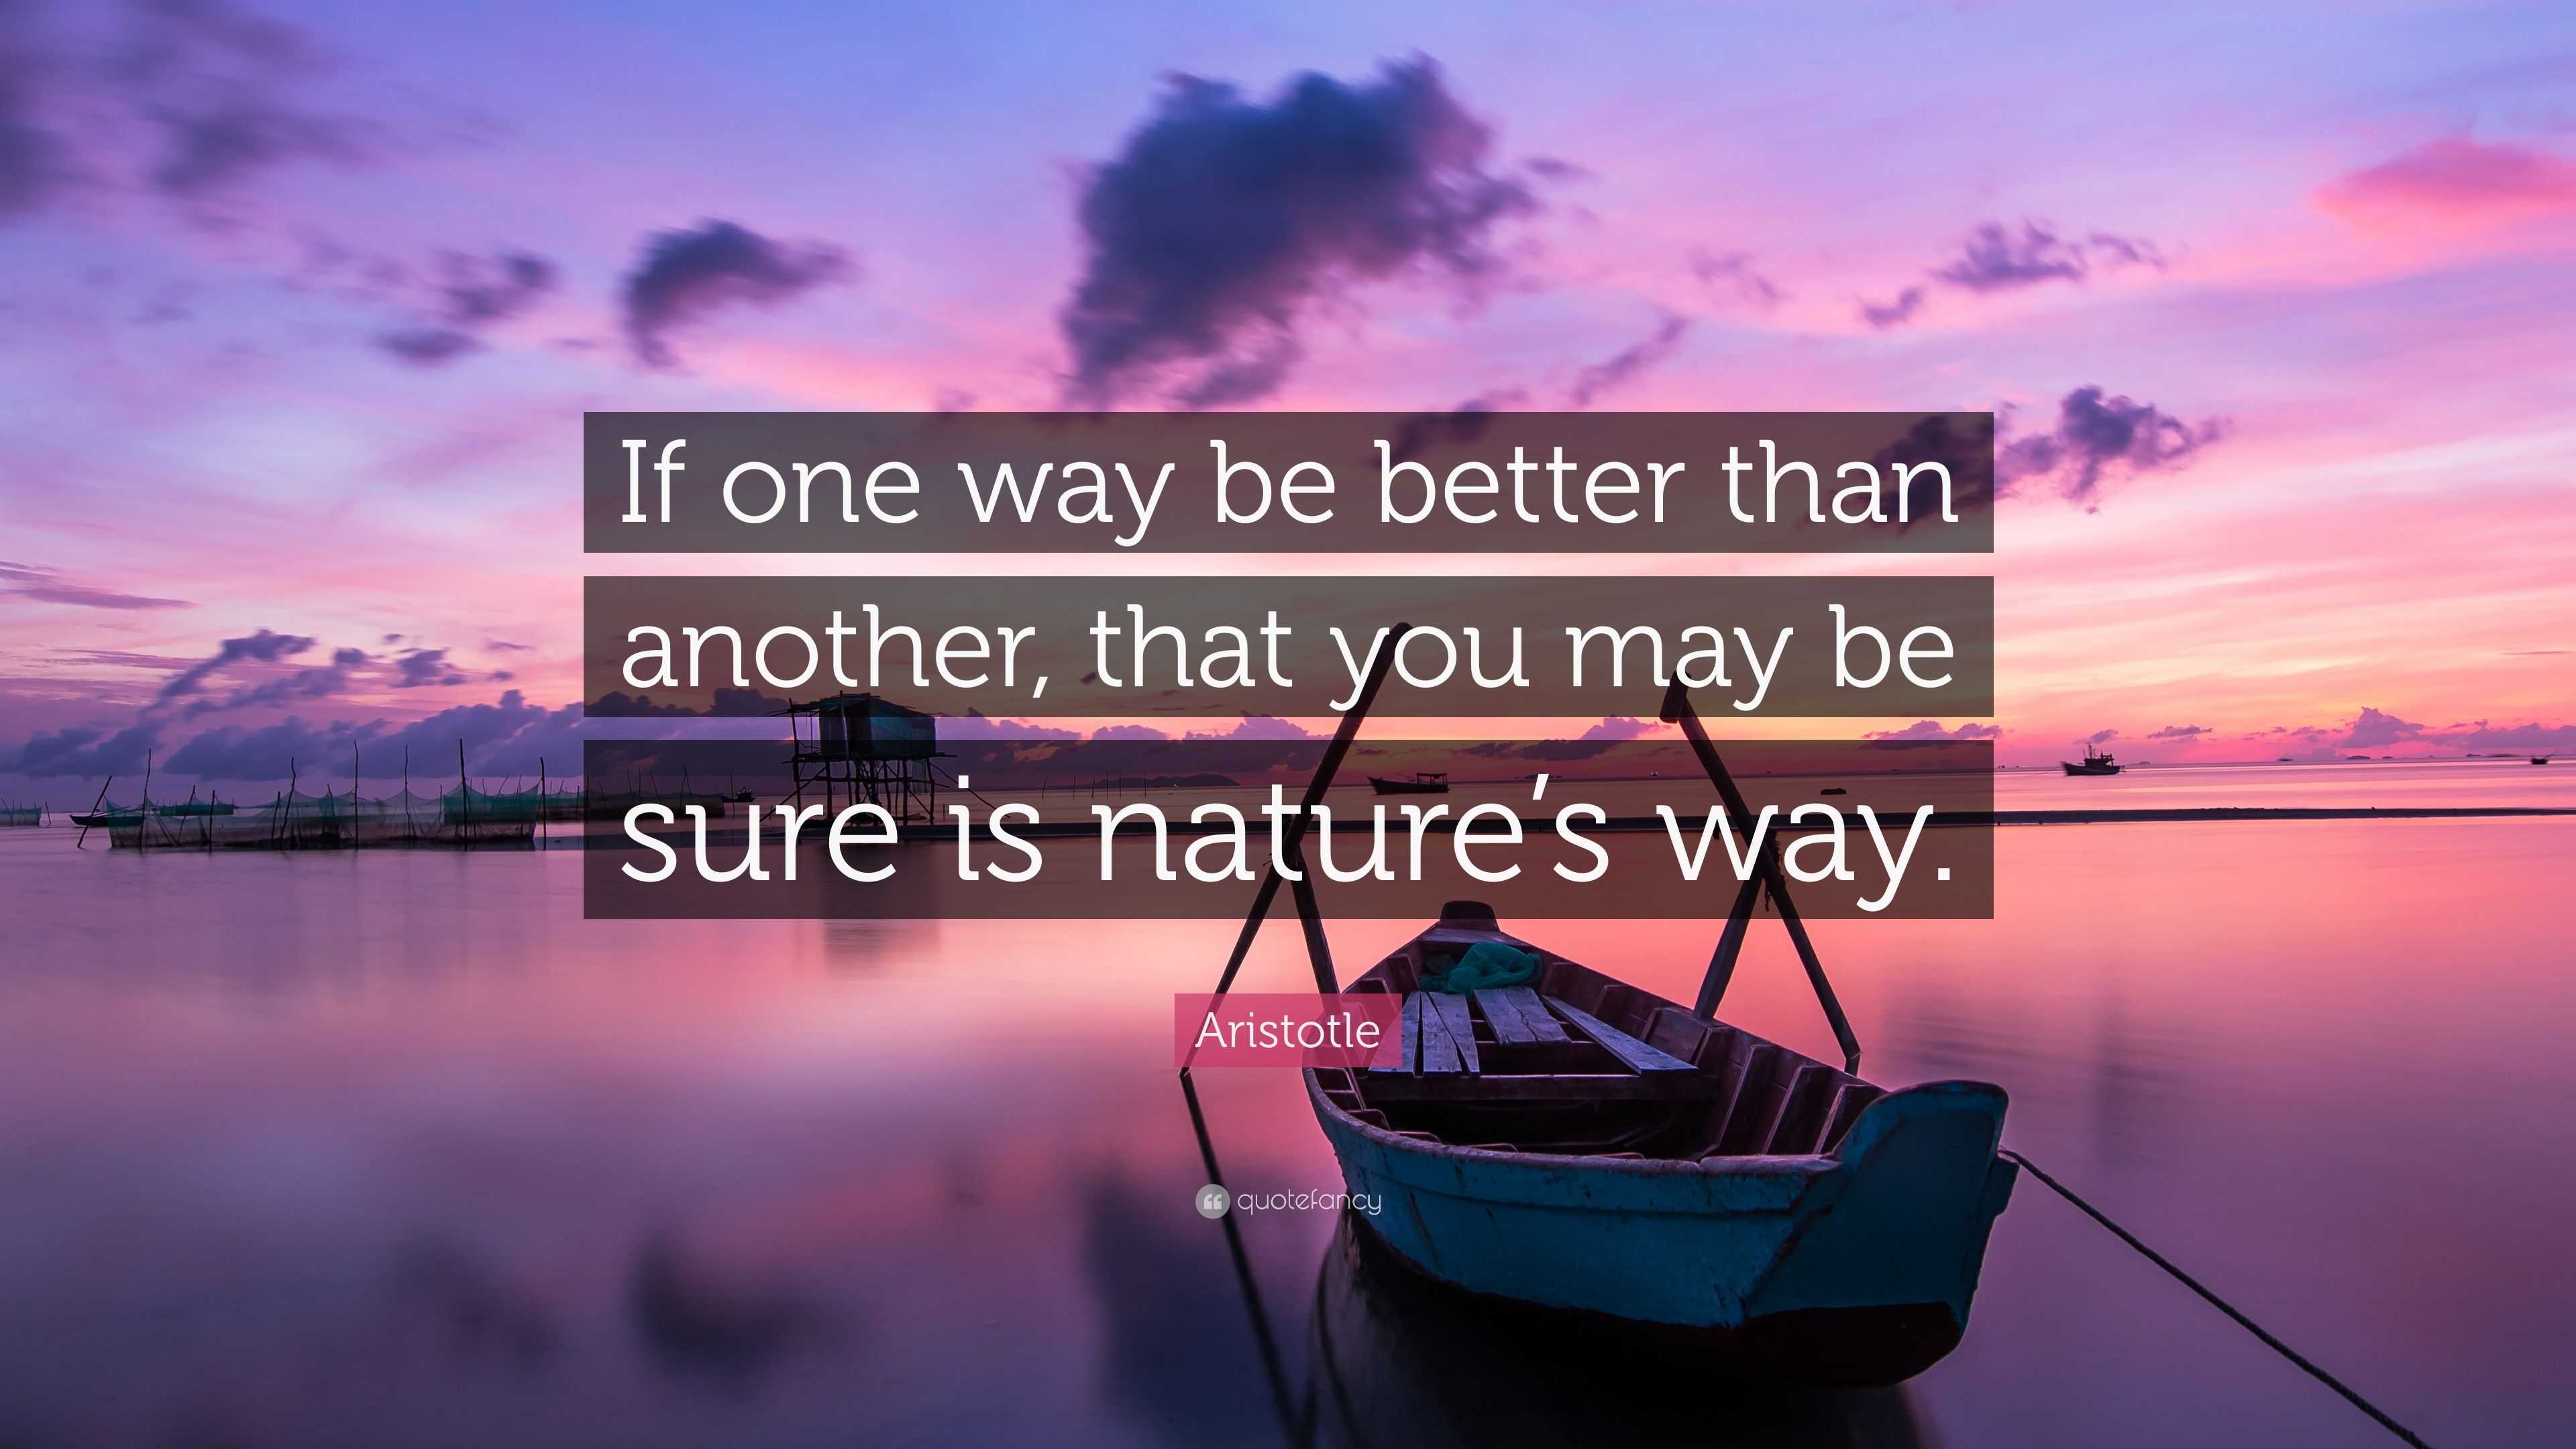 Aristotle Quote: “If one way be better than another, that you may be ...